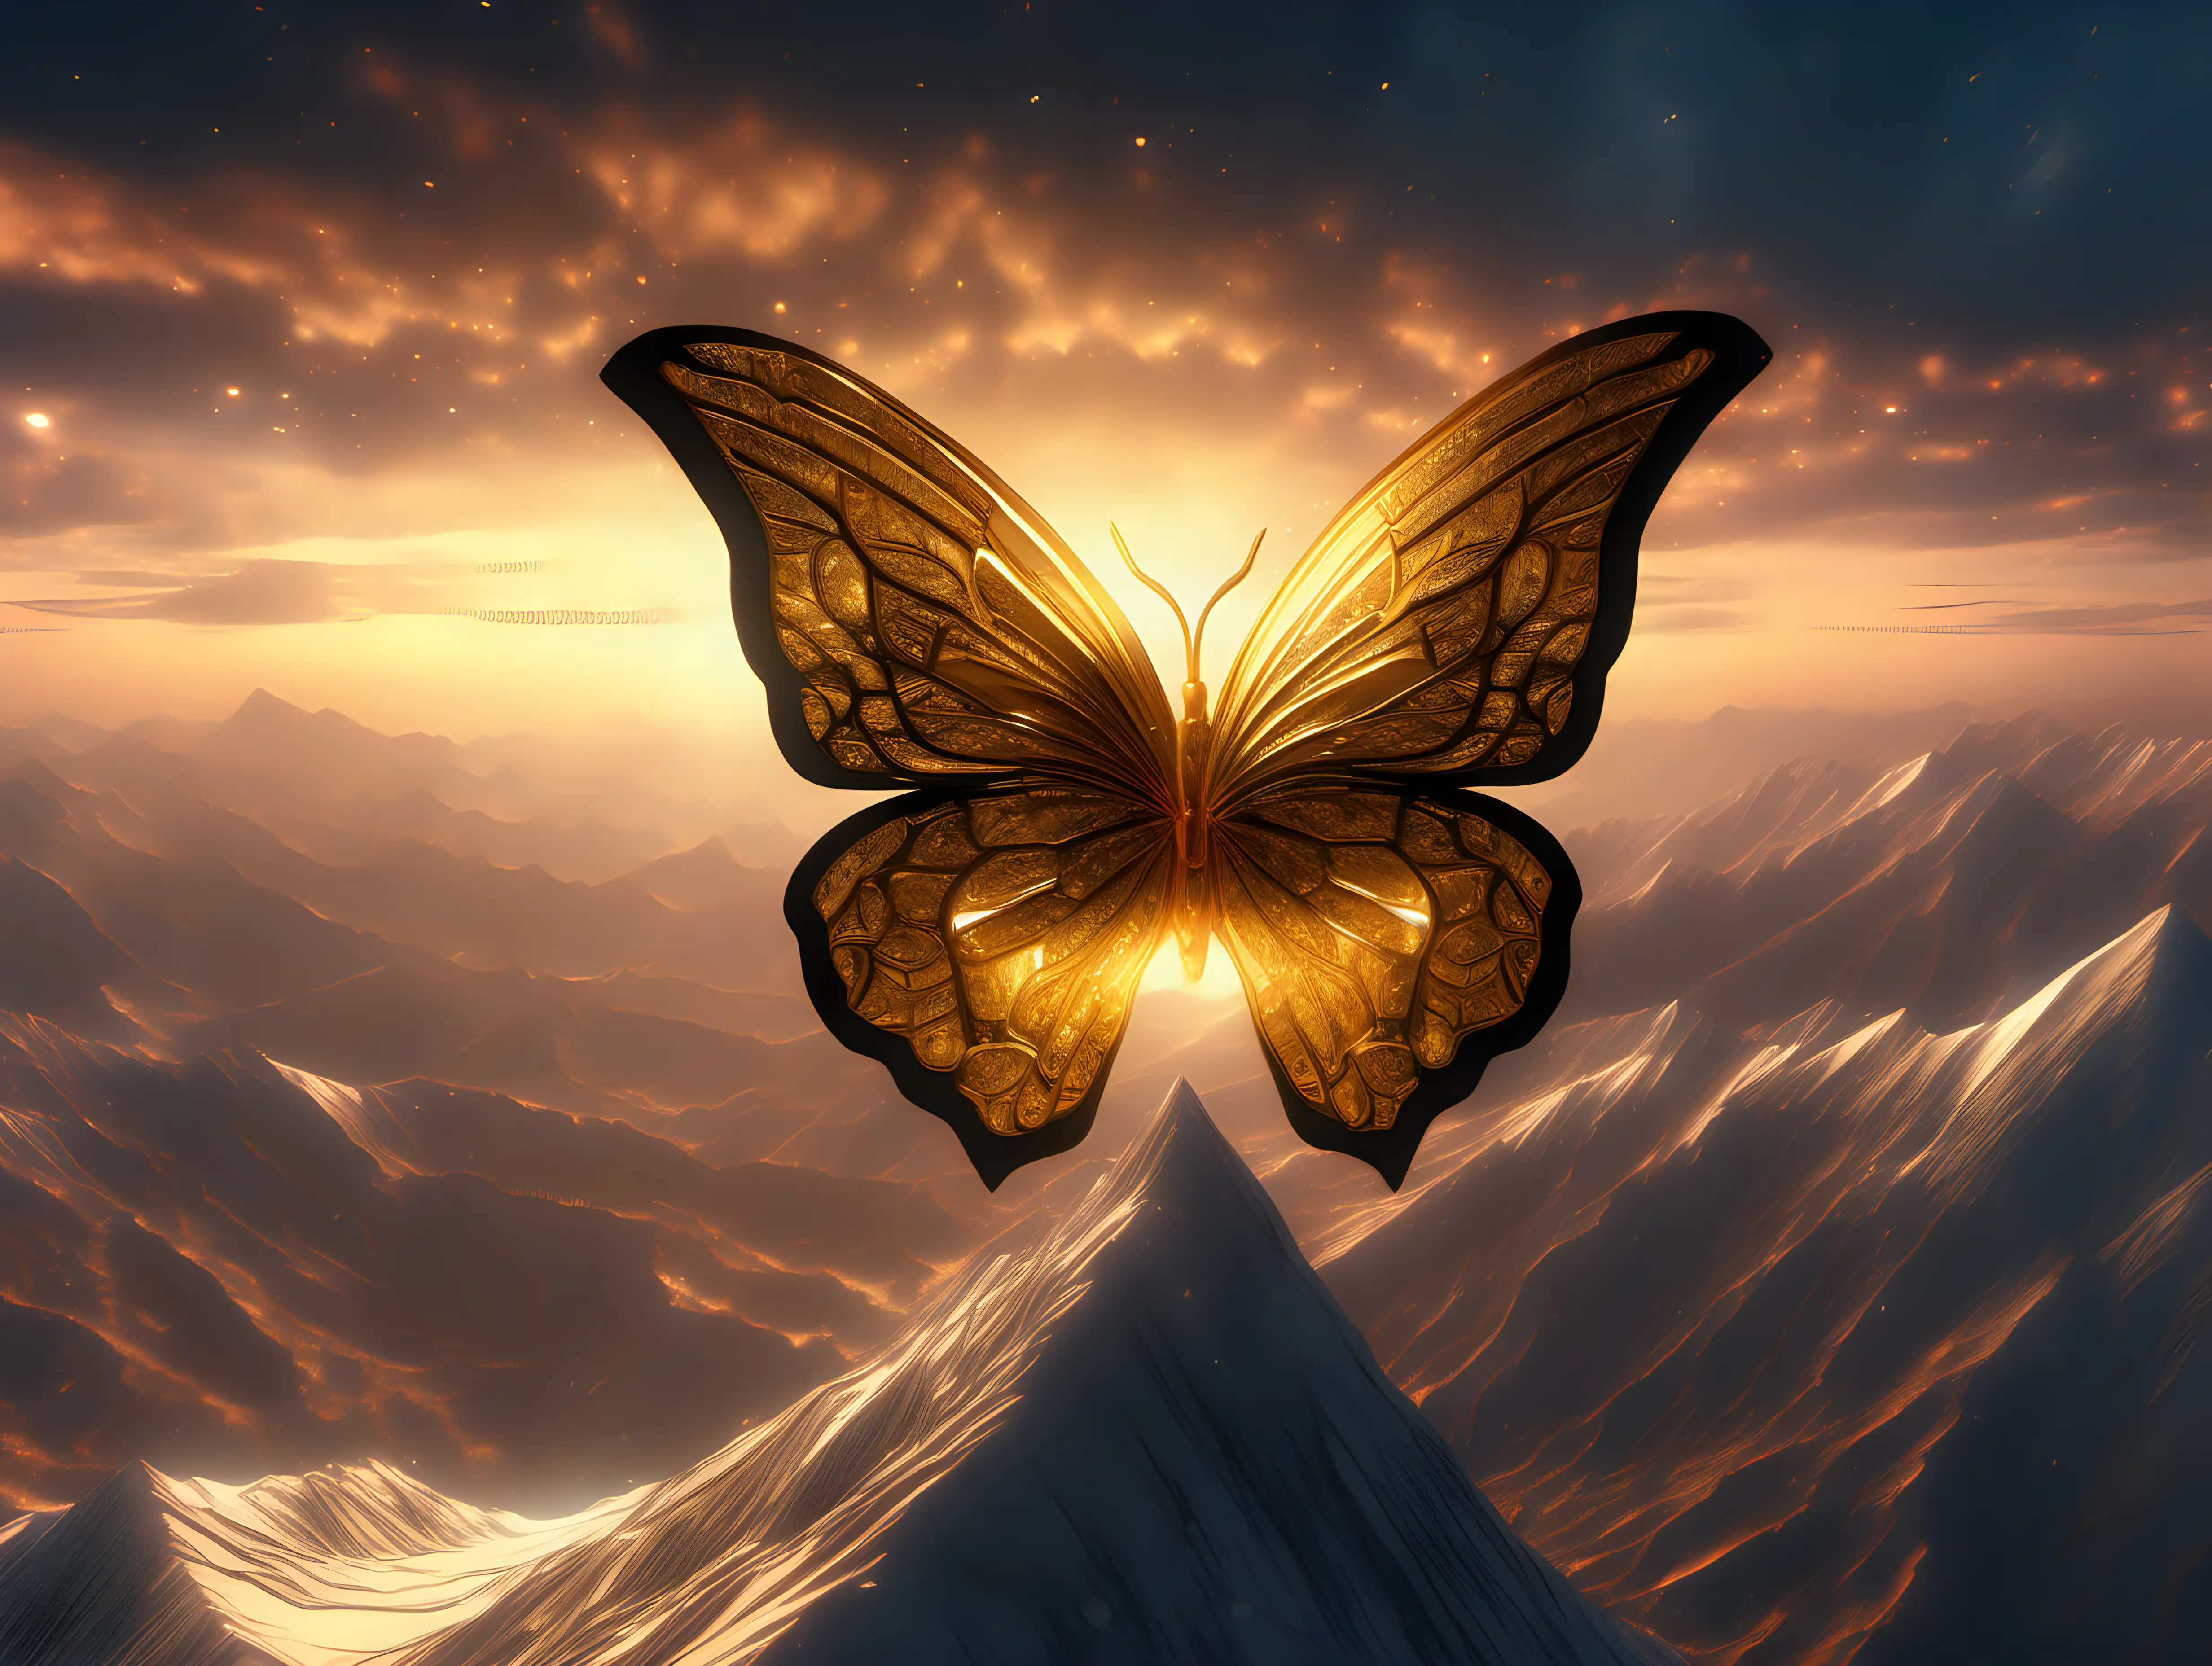 Epic Sunset Ascent Conquering the Mythical Mountain with Galaxy Butterfly Sky